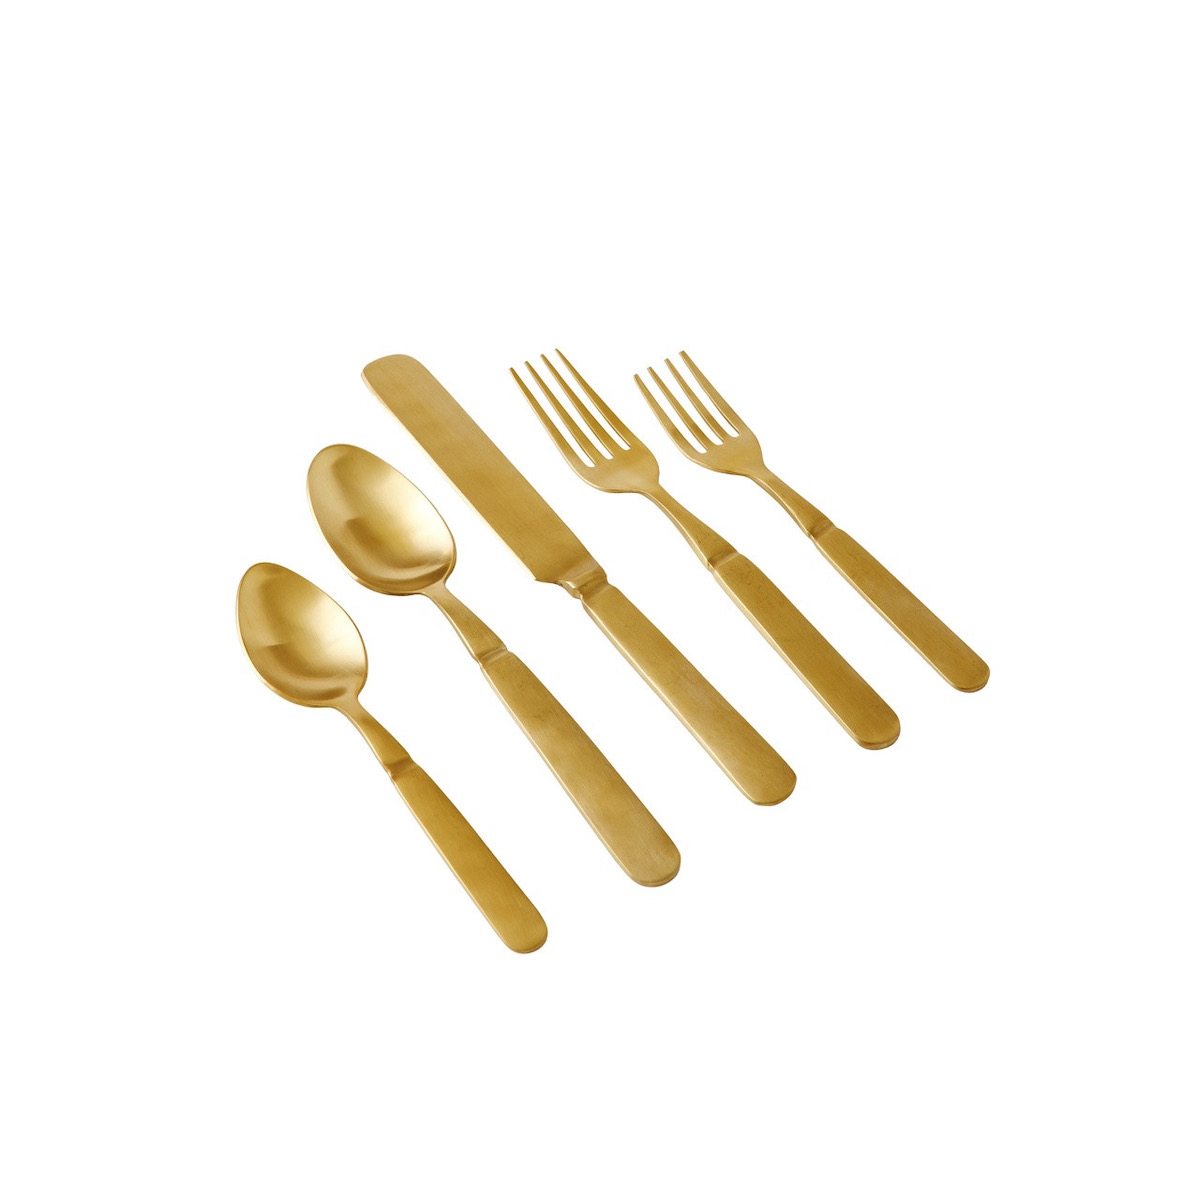 A set of two golden spoons, a knife, and two forks on a white background